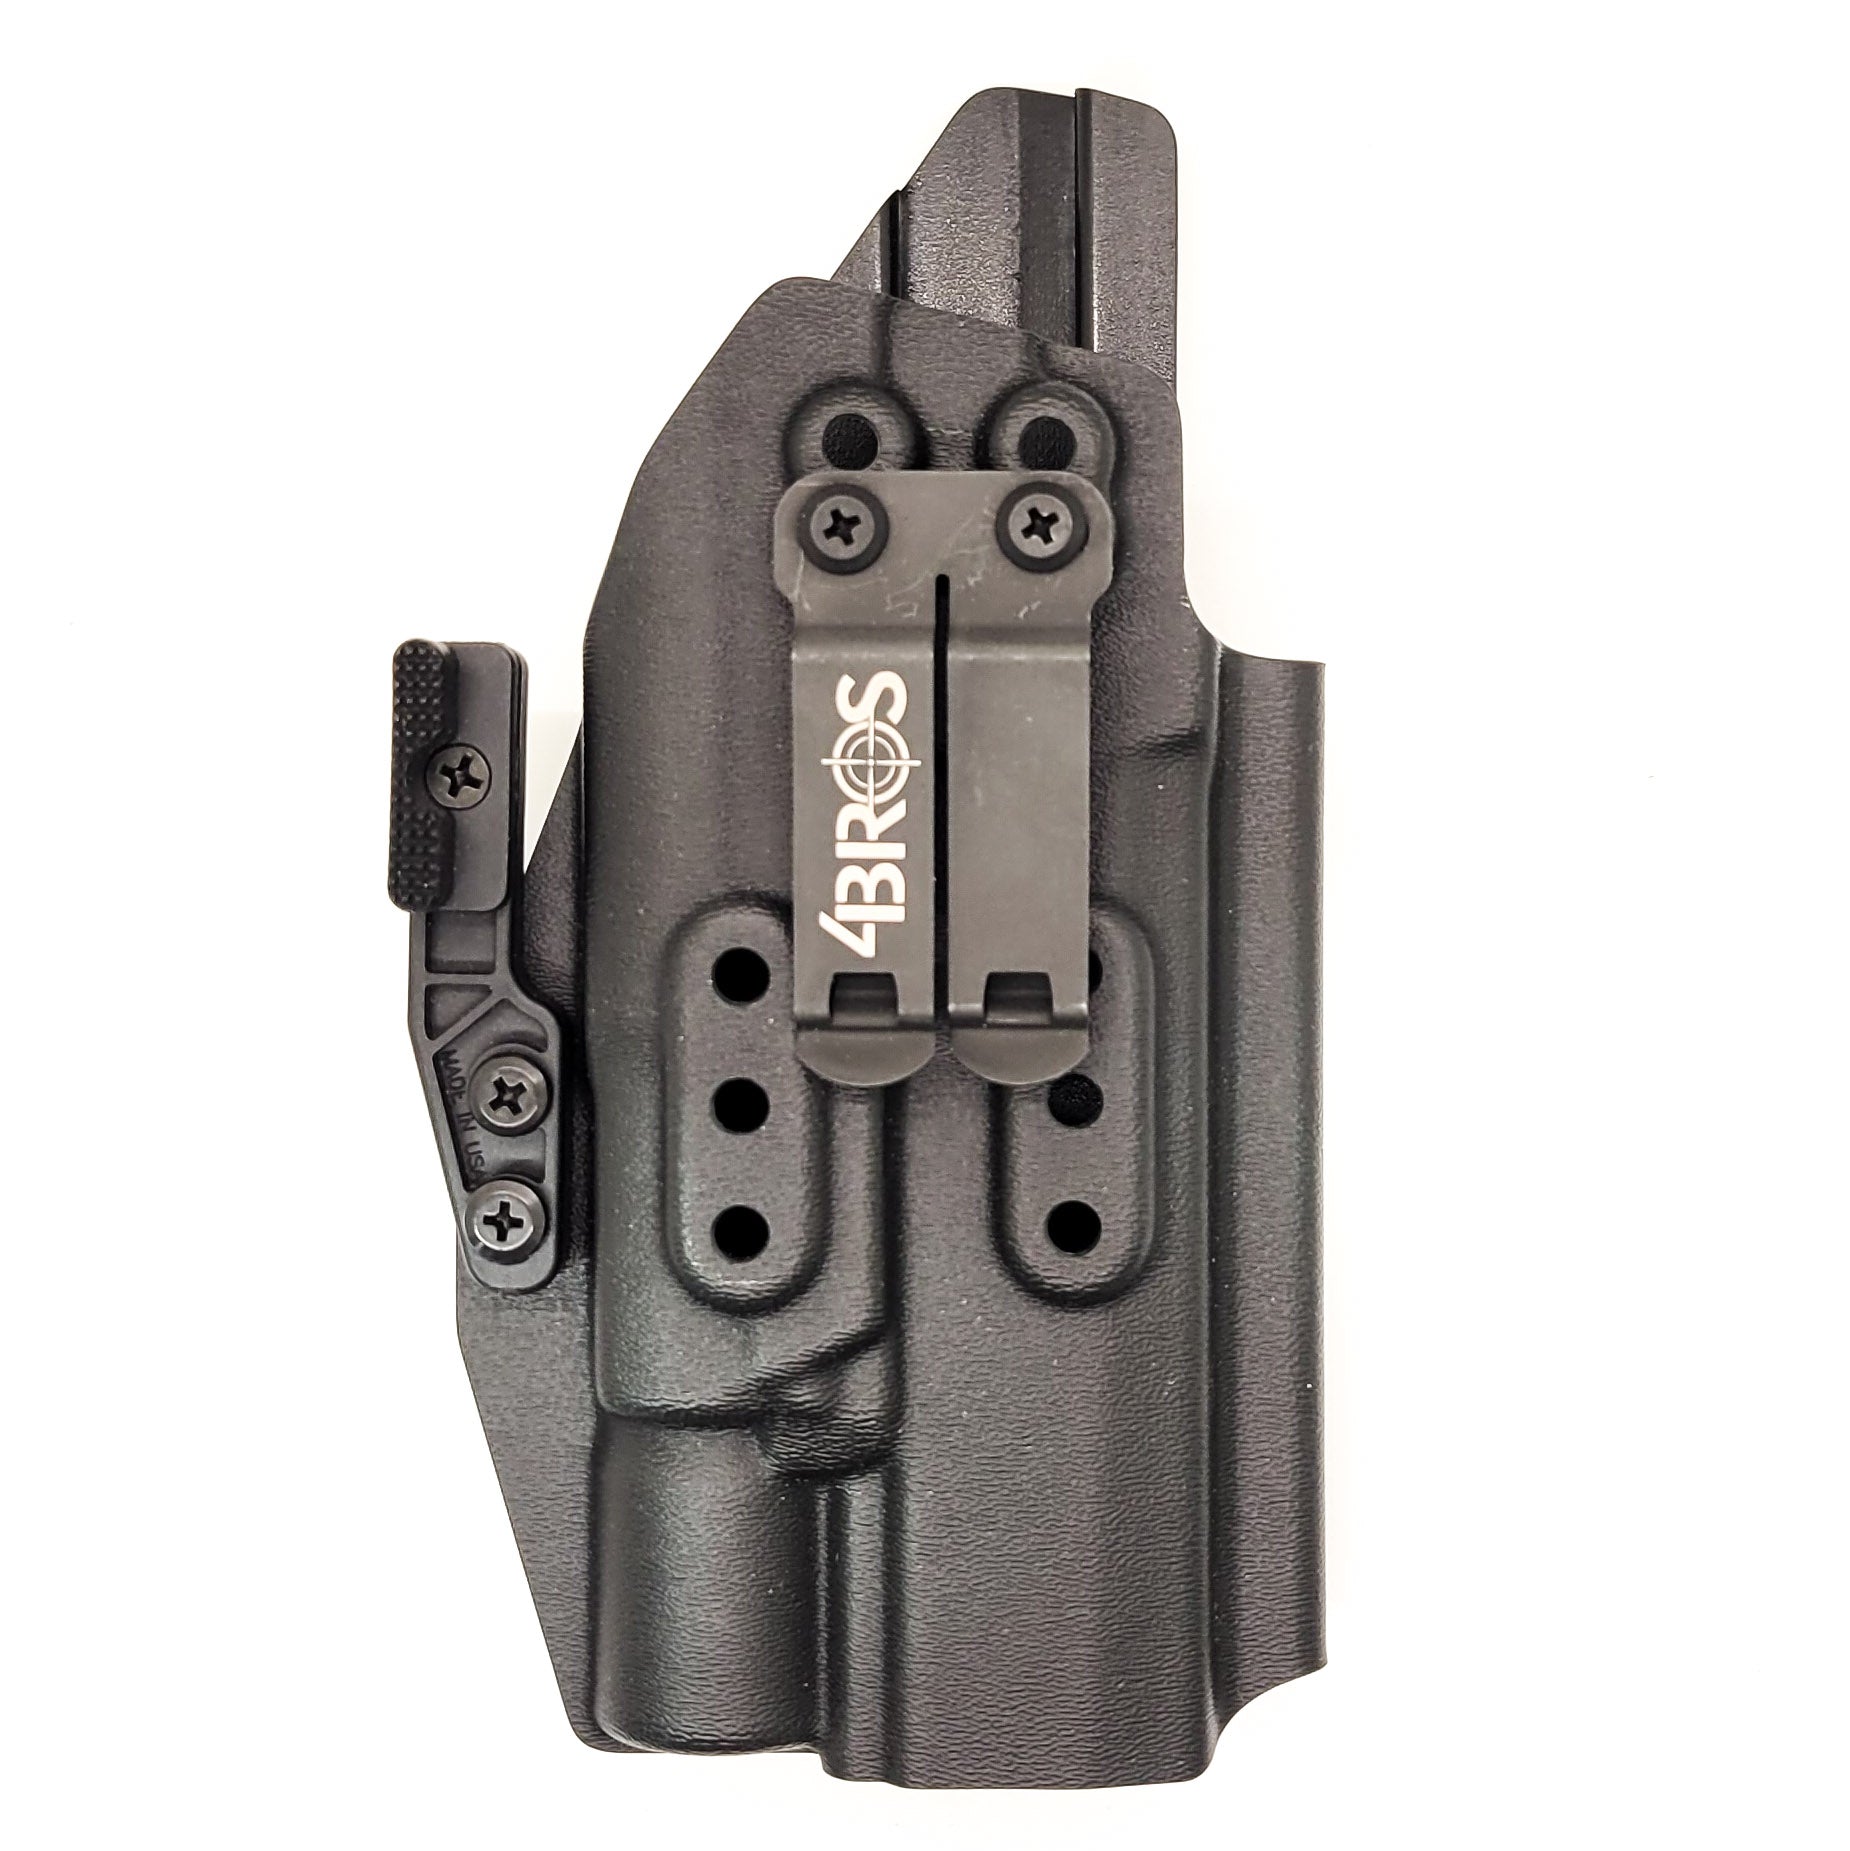 Inside Waistband Holster designed to fit the Sig Sauer P320 Full Size and Carry pistols with the Surefire X300U-A or X300U-B light and Align Tactical Thumb Rest Takedown Lever mounted to the pistol. The holster retention is on the light itself and not the pistol, which means the holster will not work without the light mounted on the firearm.